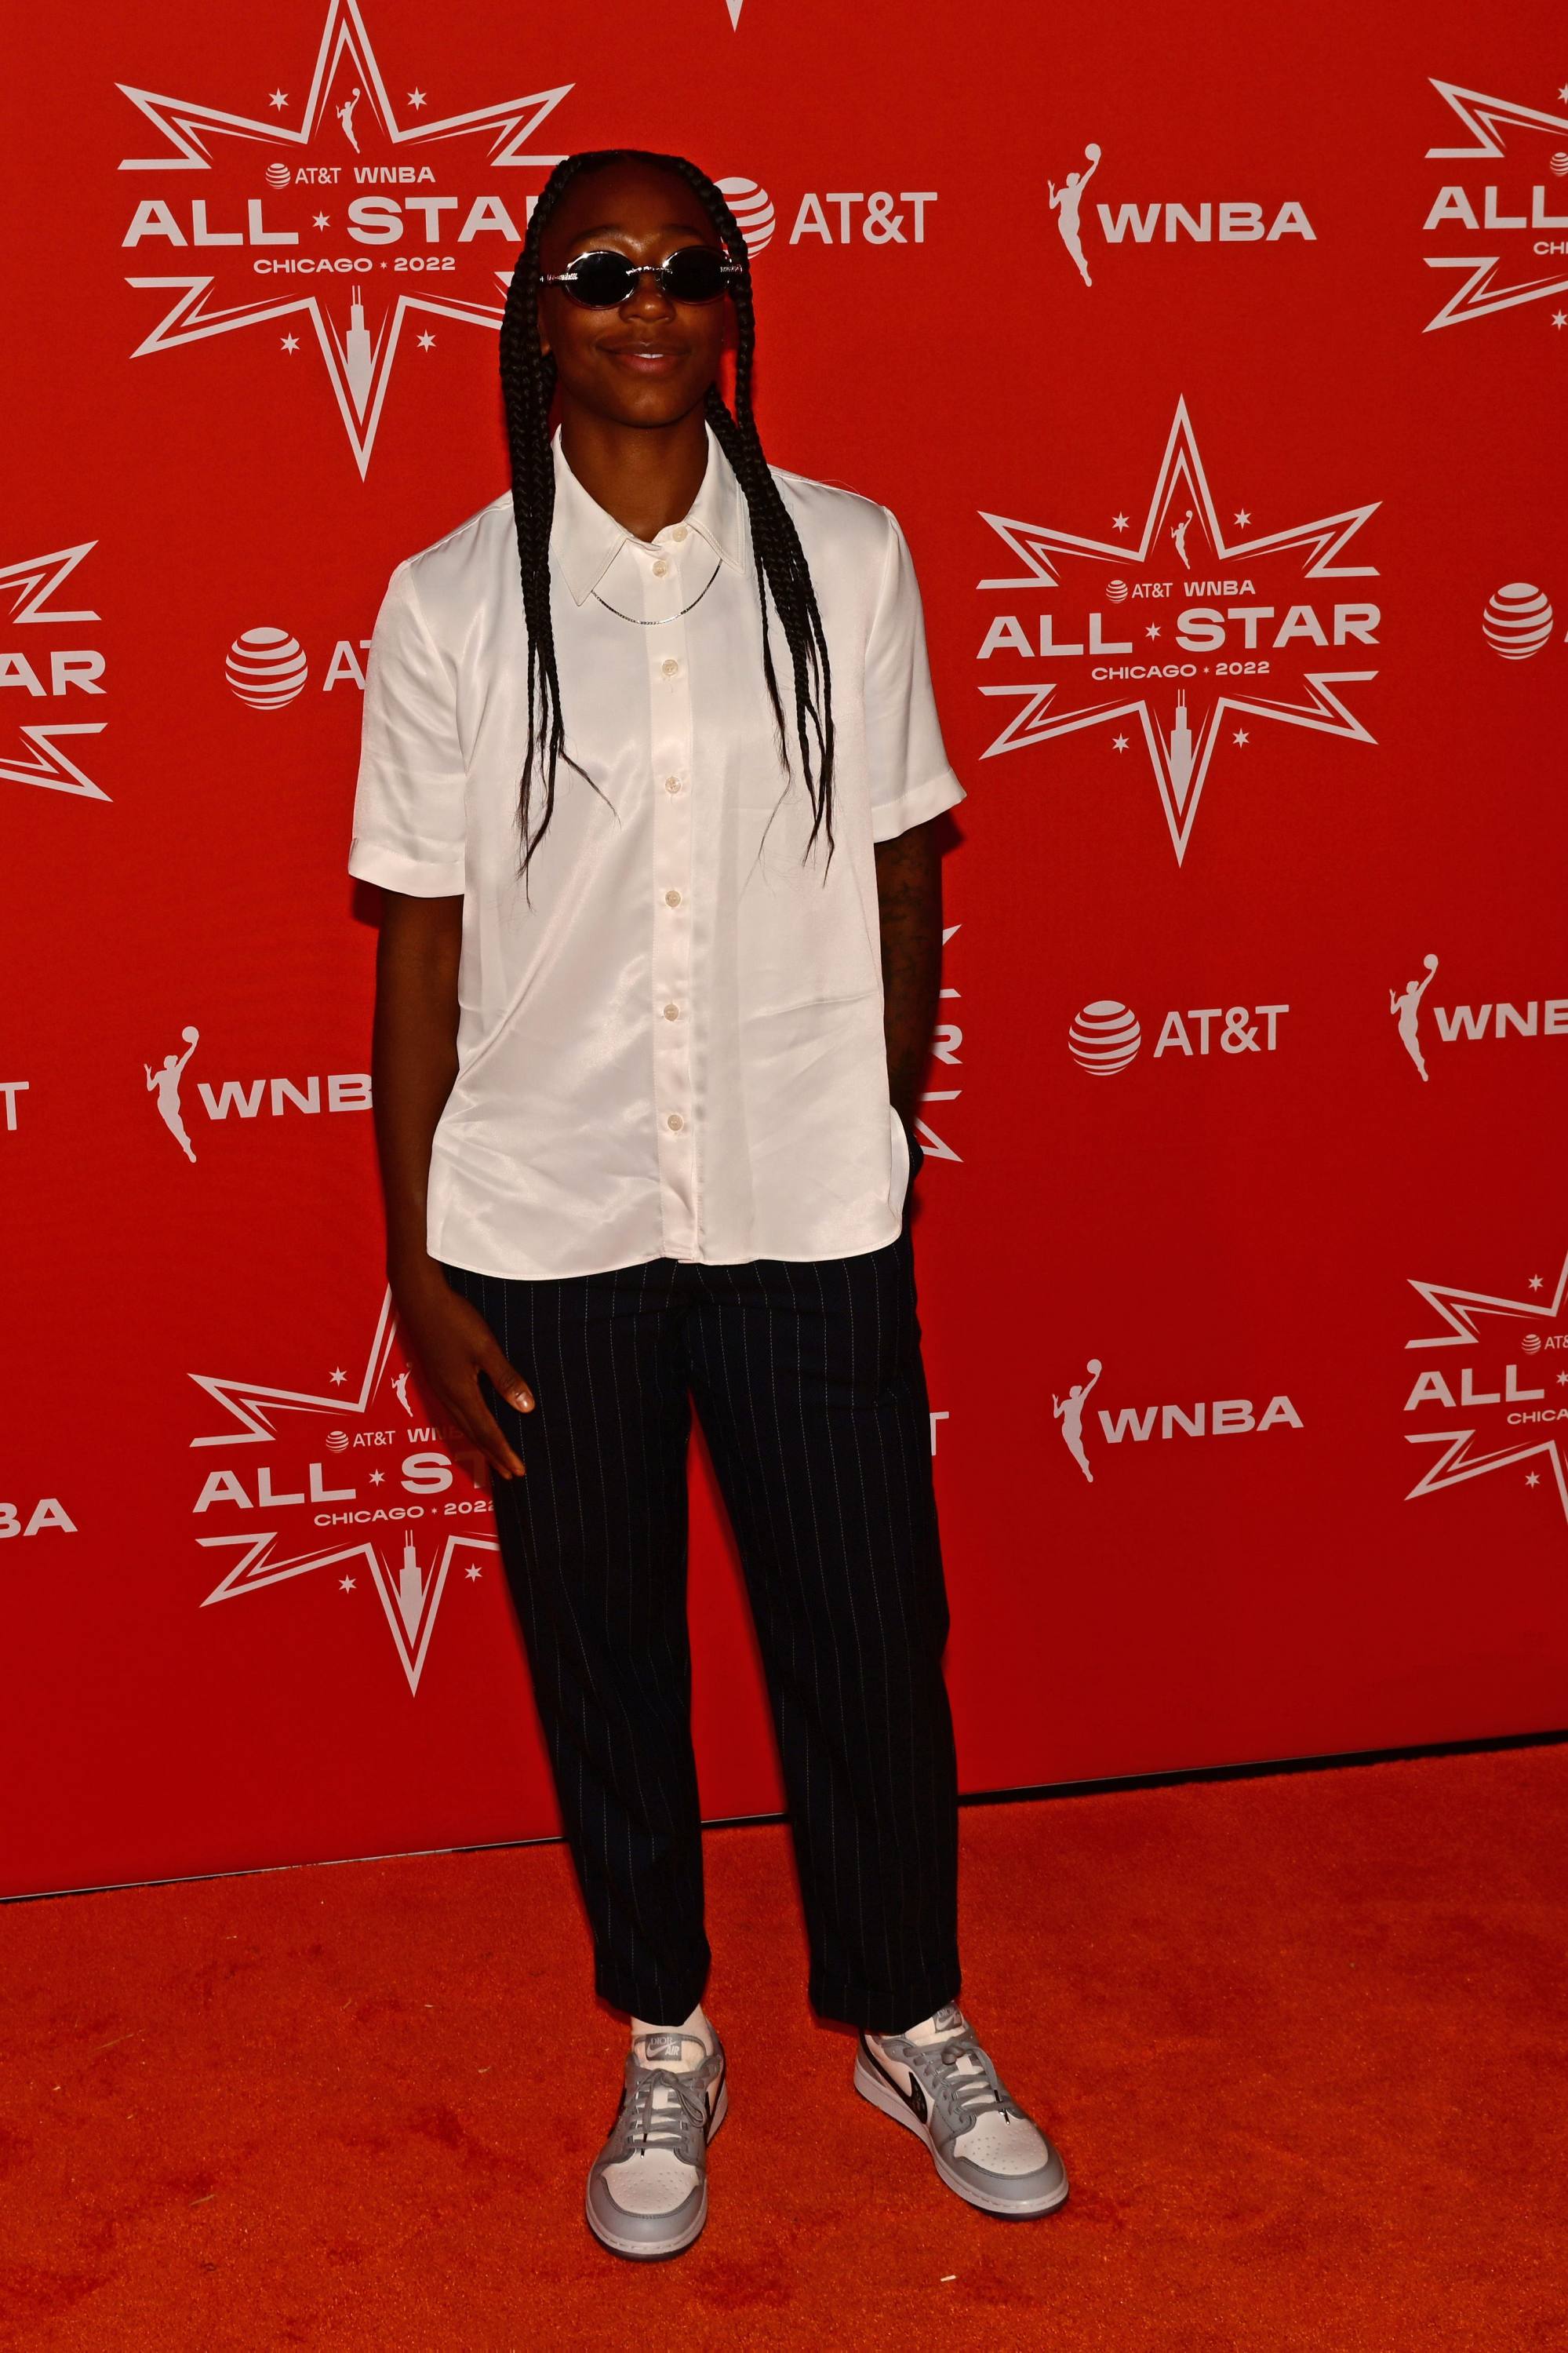 WNBA players are the next big fashion icons, styled in Dior and streetwear  for events and photographed in trending pregame outfits